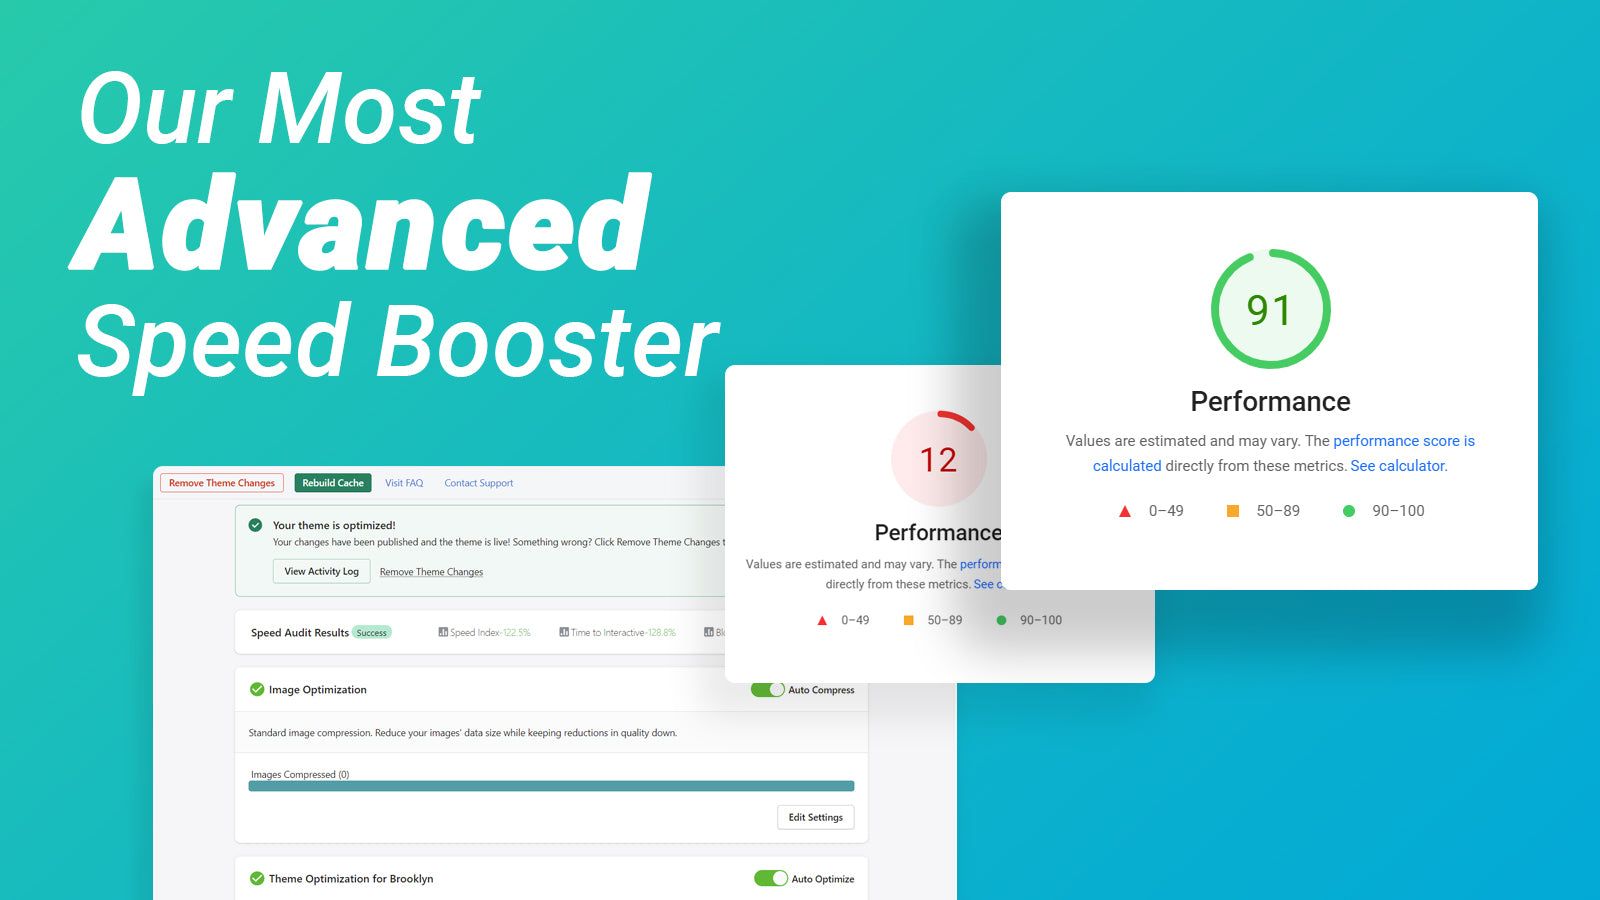 Hyperspeed is our most advanced speed booster for Shopify.